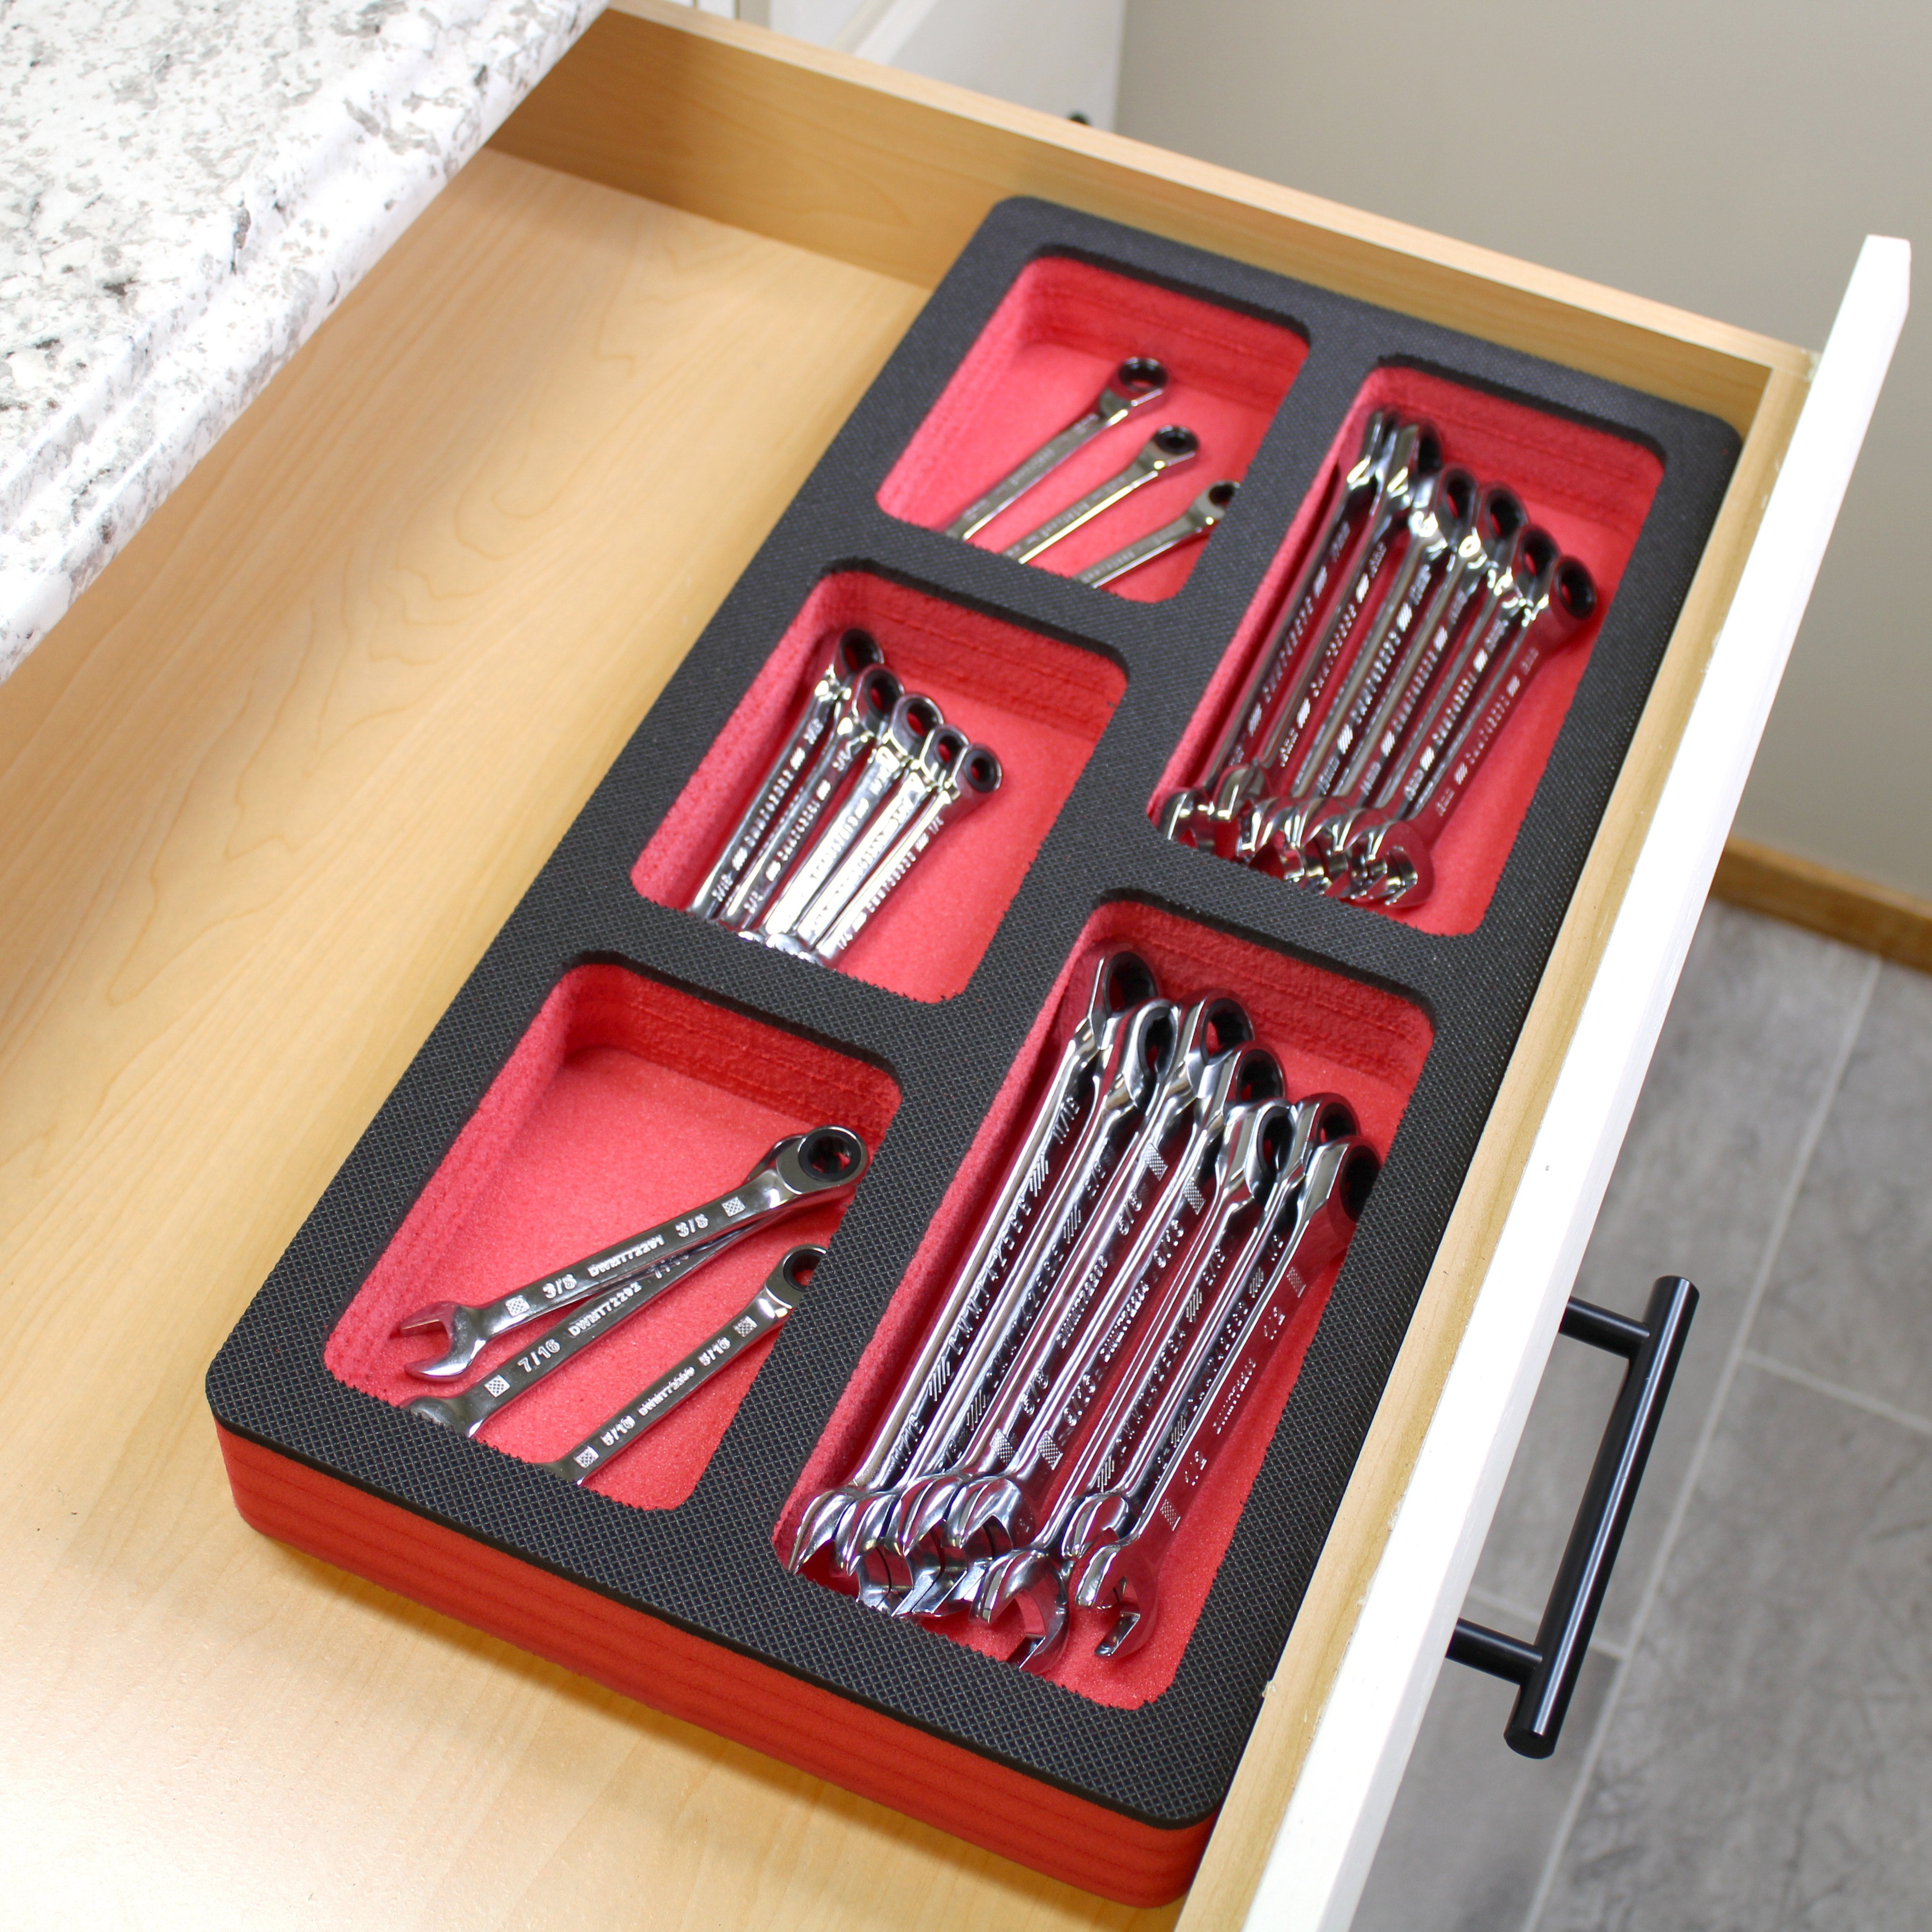 Tool Drawer Organizer Insert Red and Black Durable Foam Strong Non-Slip Anti-Rattle Bin Holder Tray 20 x 10 Inches 5 Pockets Fits Craftsman Husky Kobalt Milwaukee and Many Others